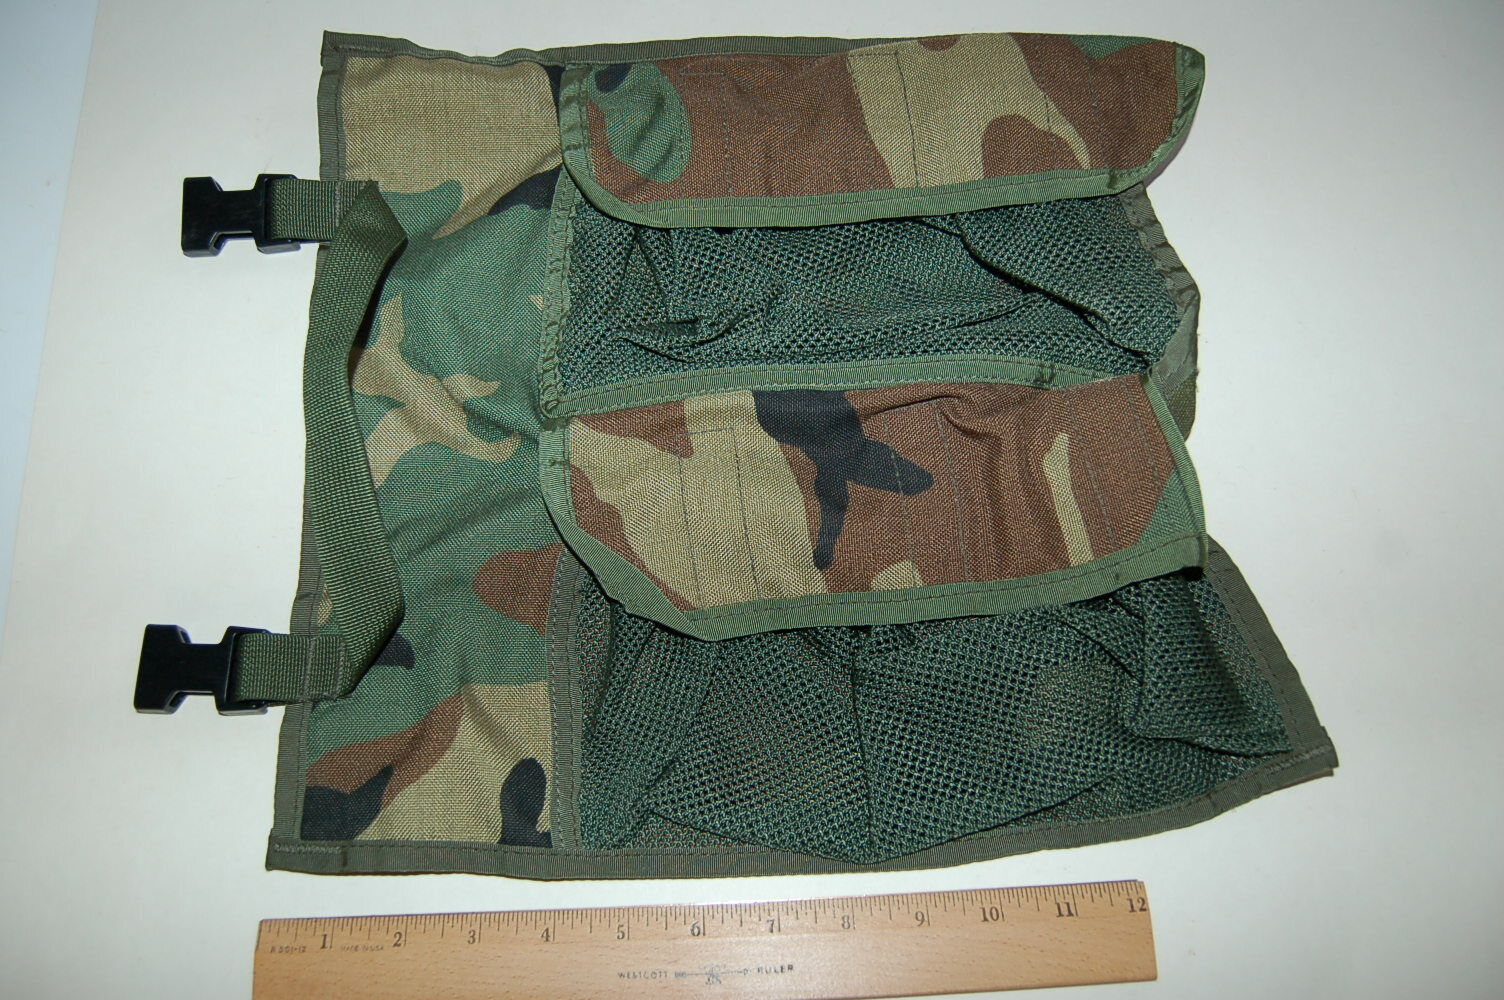 U.S. ARMY 1990's MEDICAL EQUIPMENT BACKPACK INNER REMOVABLE PANEL WITH POUCHES